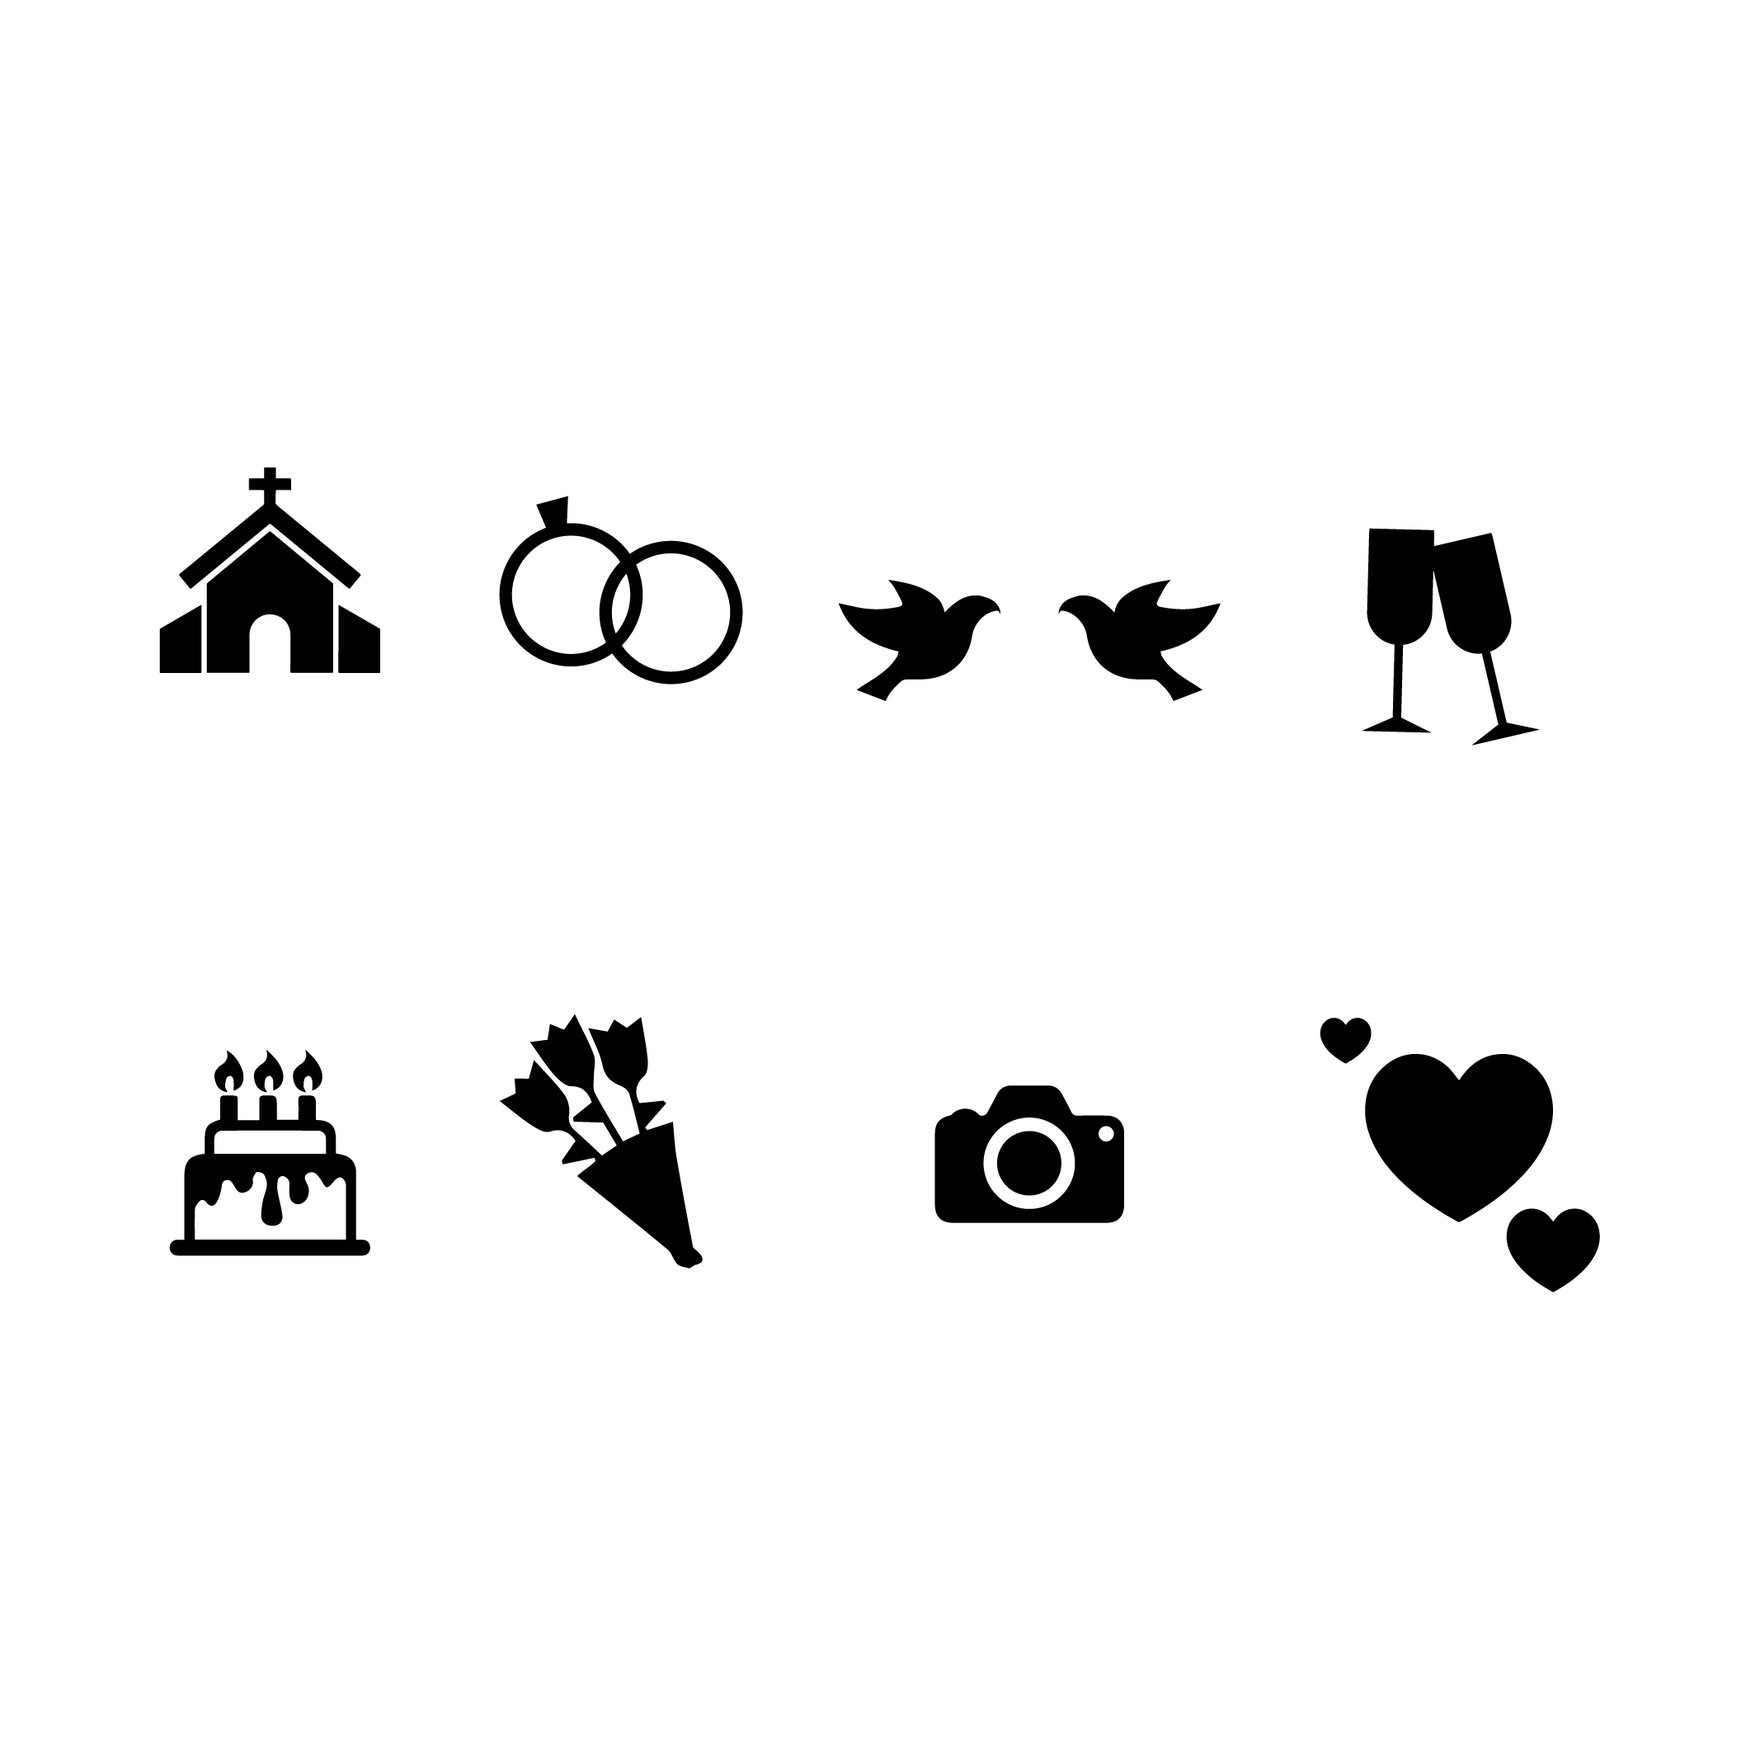 Free Wedding Icon Silhouette in Illustrator, EPS, SVG, JPG, PNG